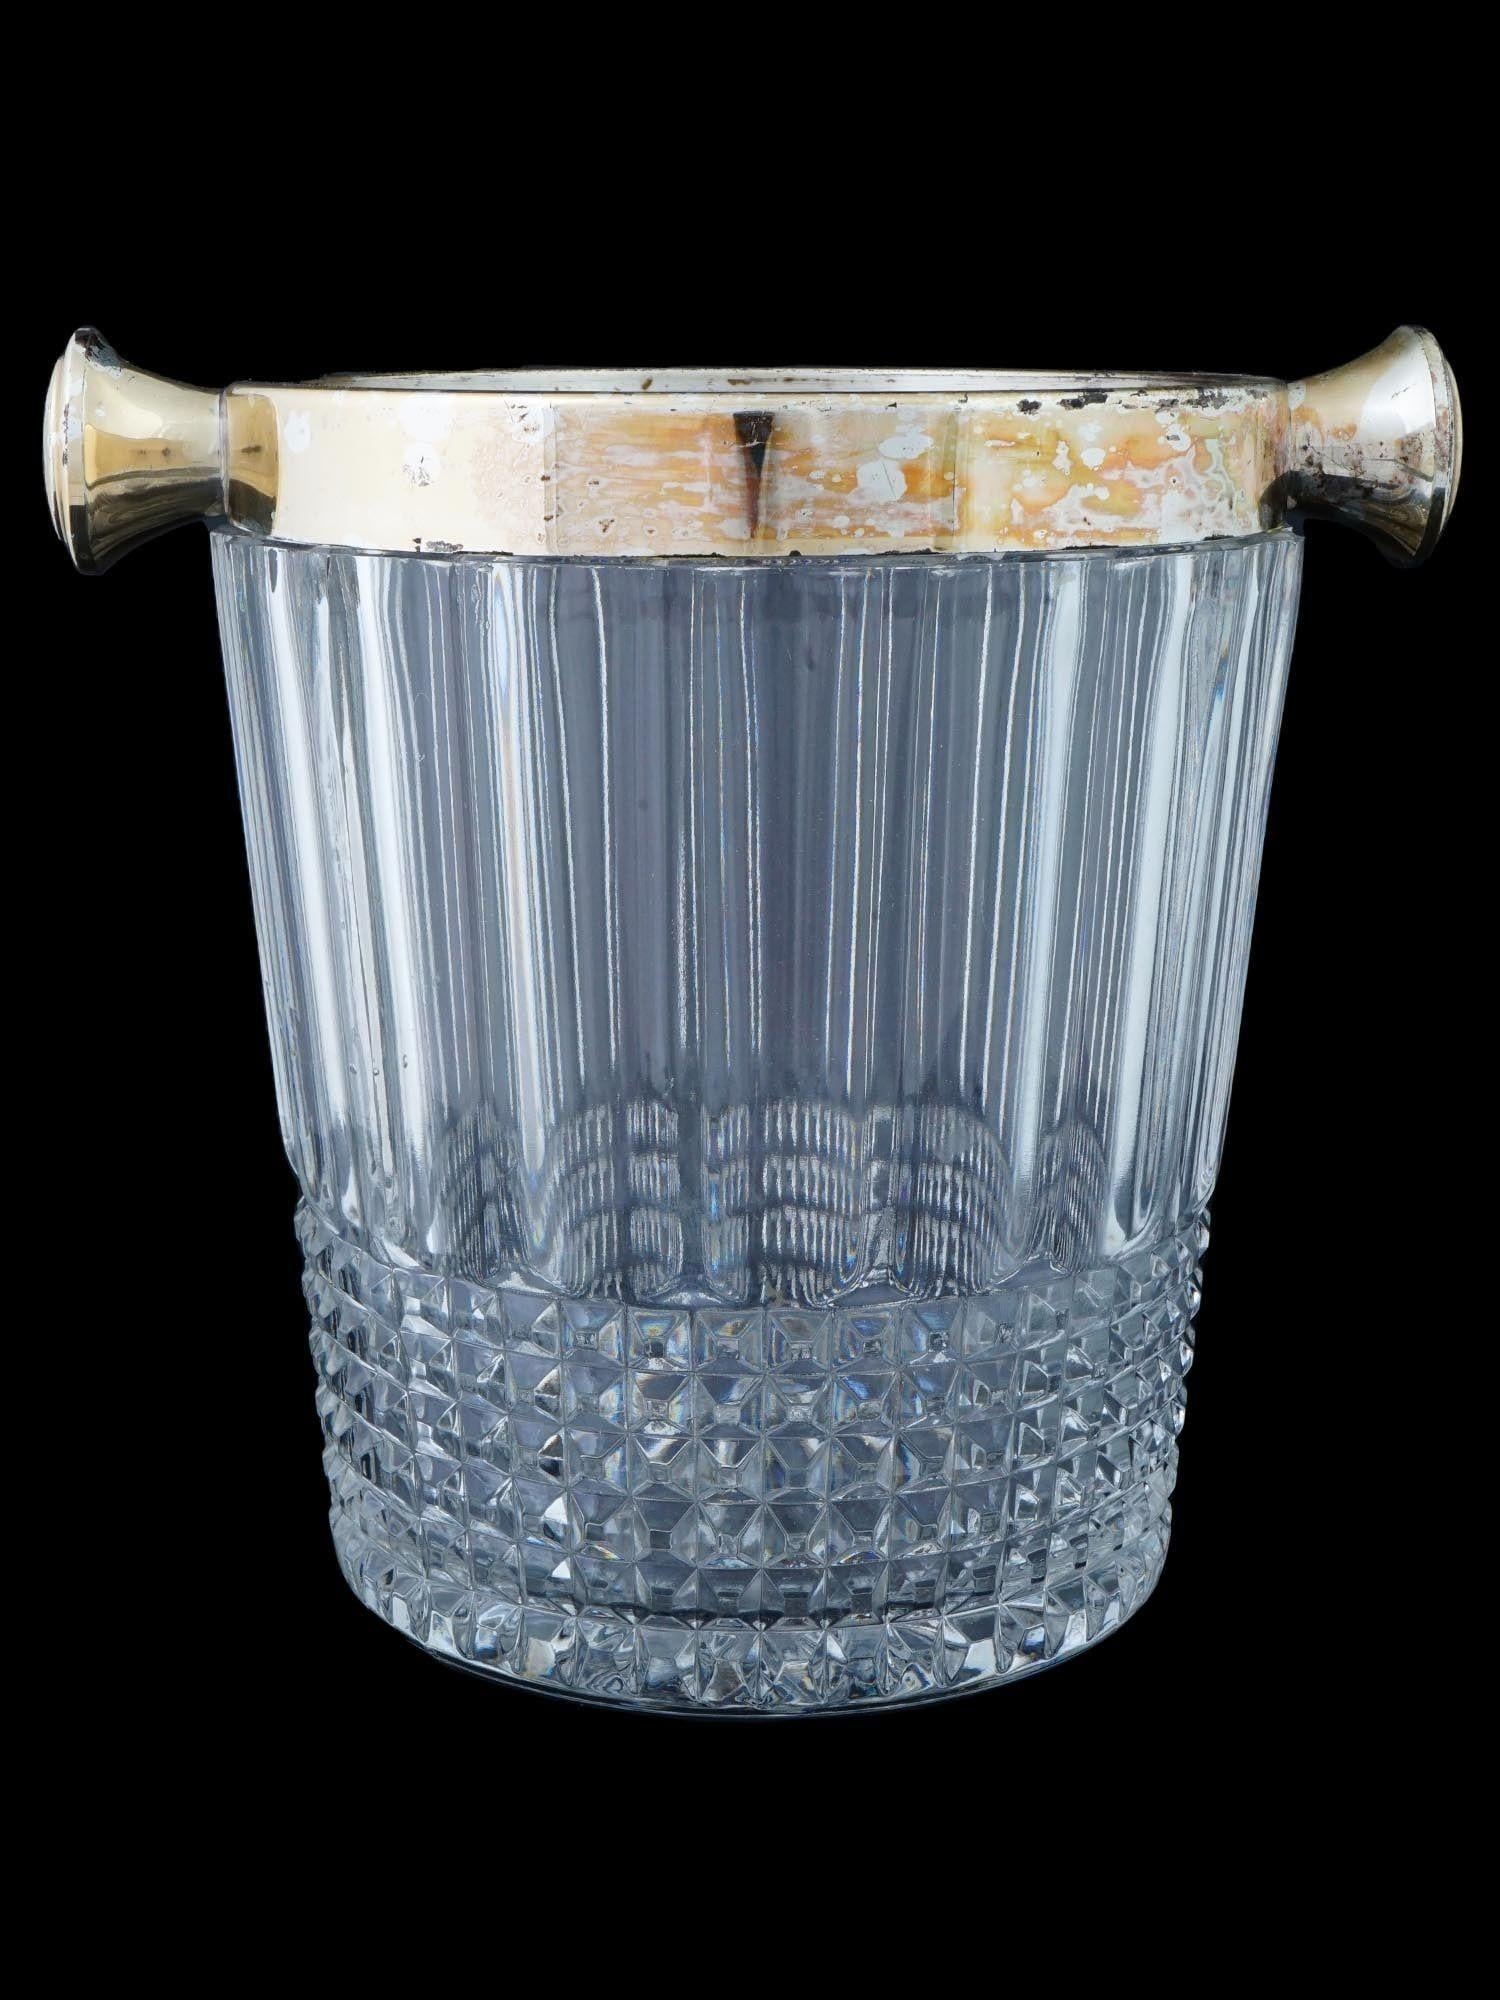 Fine vintage leaded glass ice bucket or wine cooler with ribbed design and silverplate mounts.